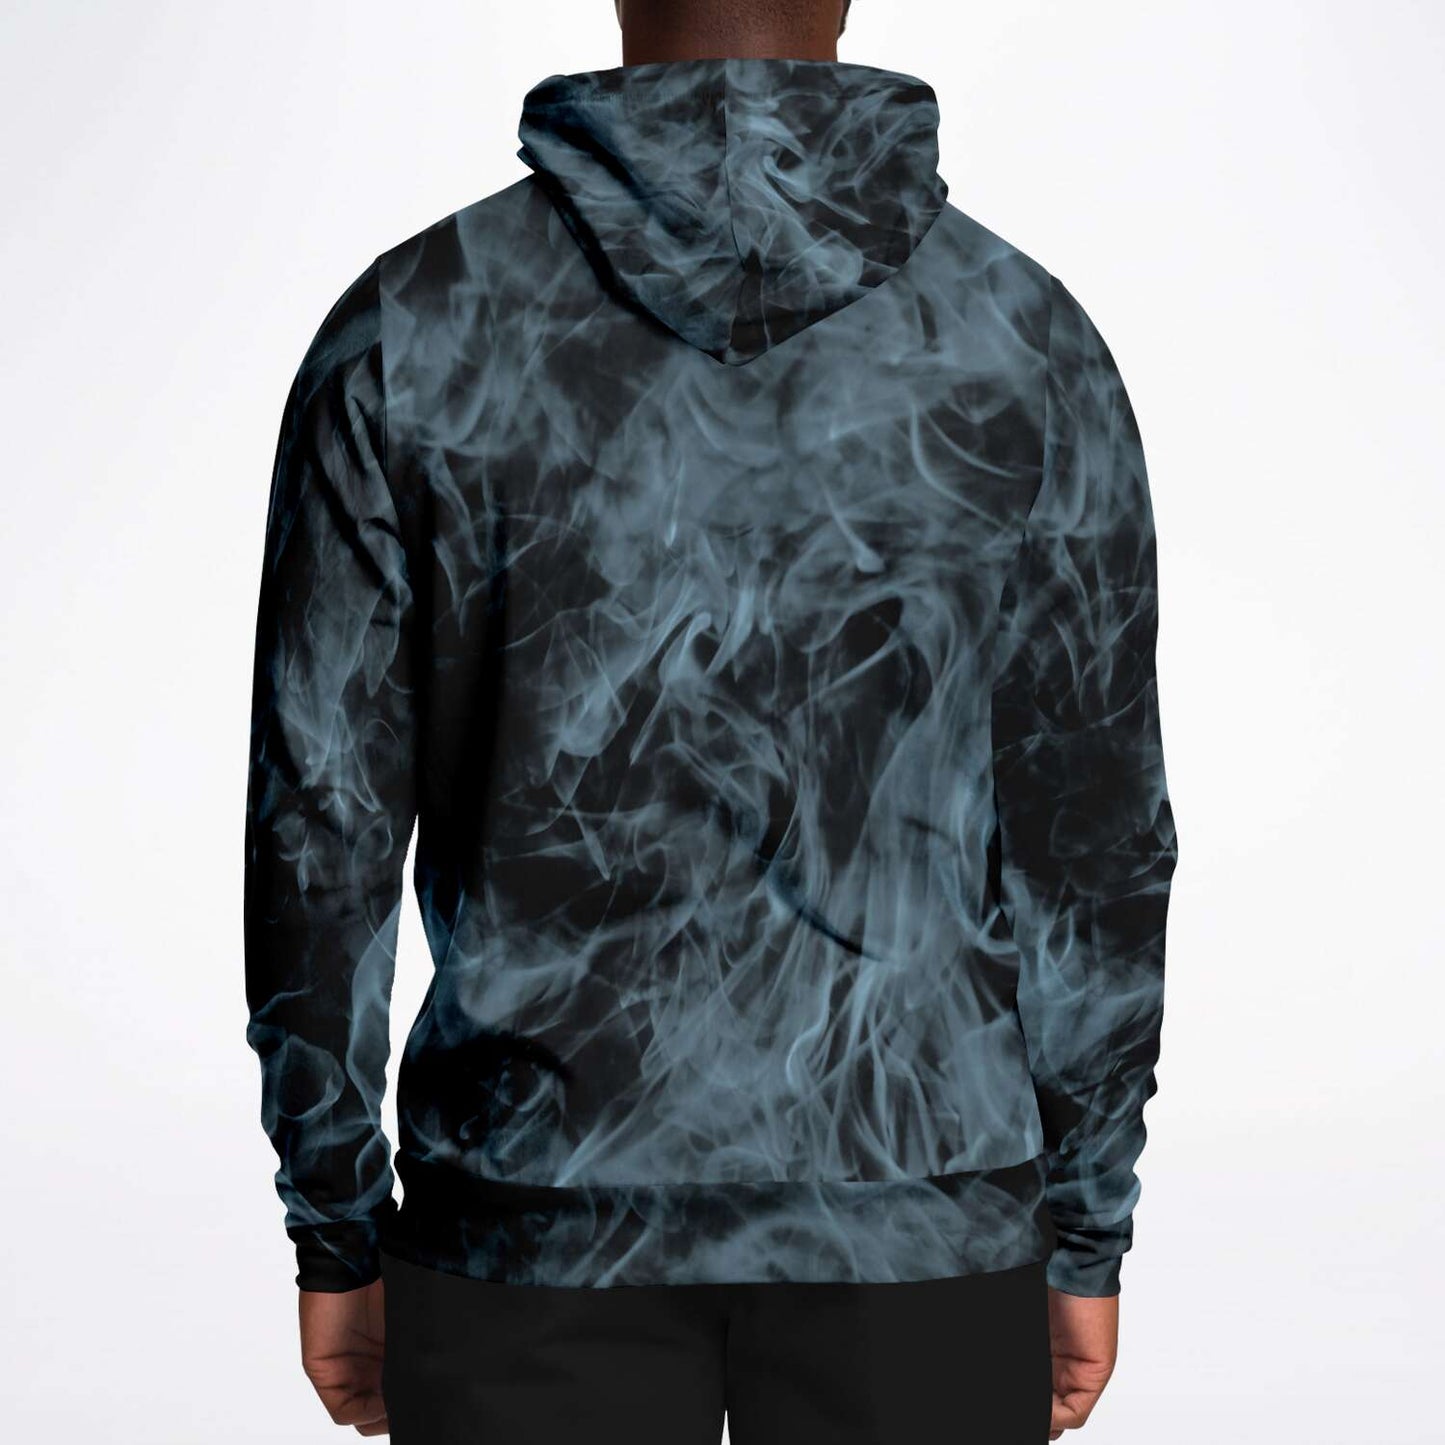 Load image into Gallery viewer, Blue Flame Unisex Hoodie
